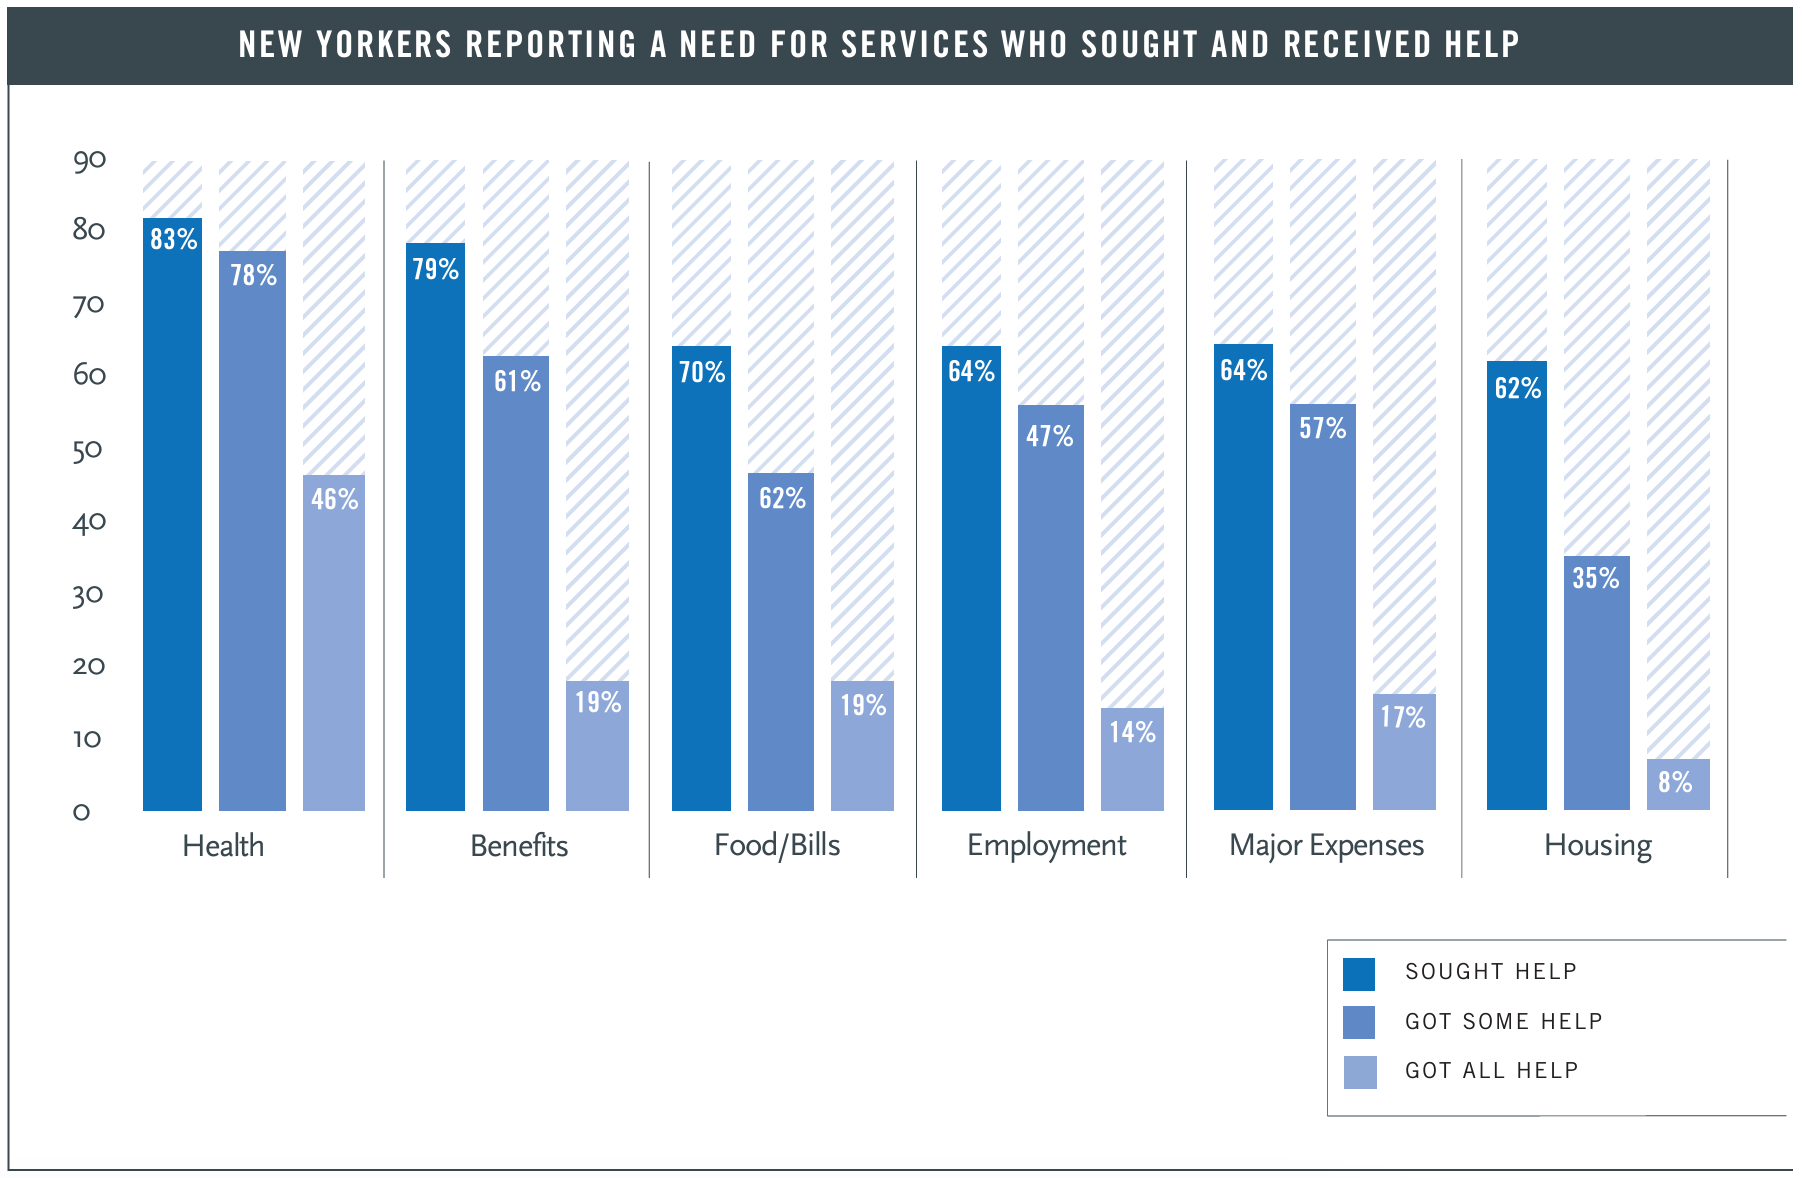 FIGURE 2 NEW YORKERS REPORTING A NEED FOR SERVICES WHO SOUGHT AND RECEIVED HELP